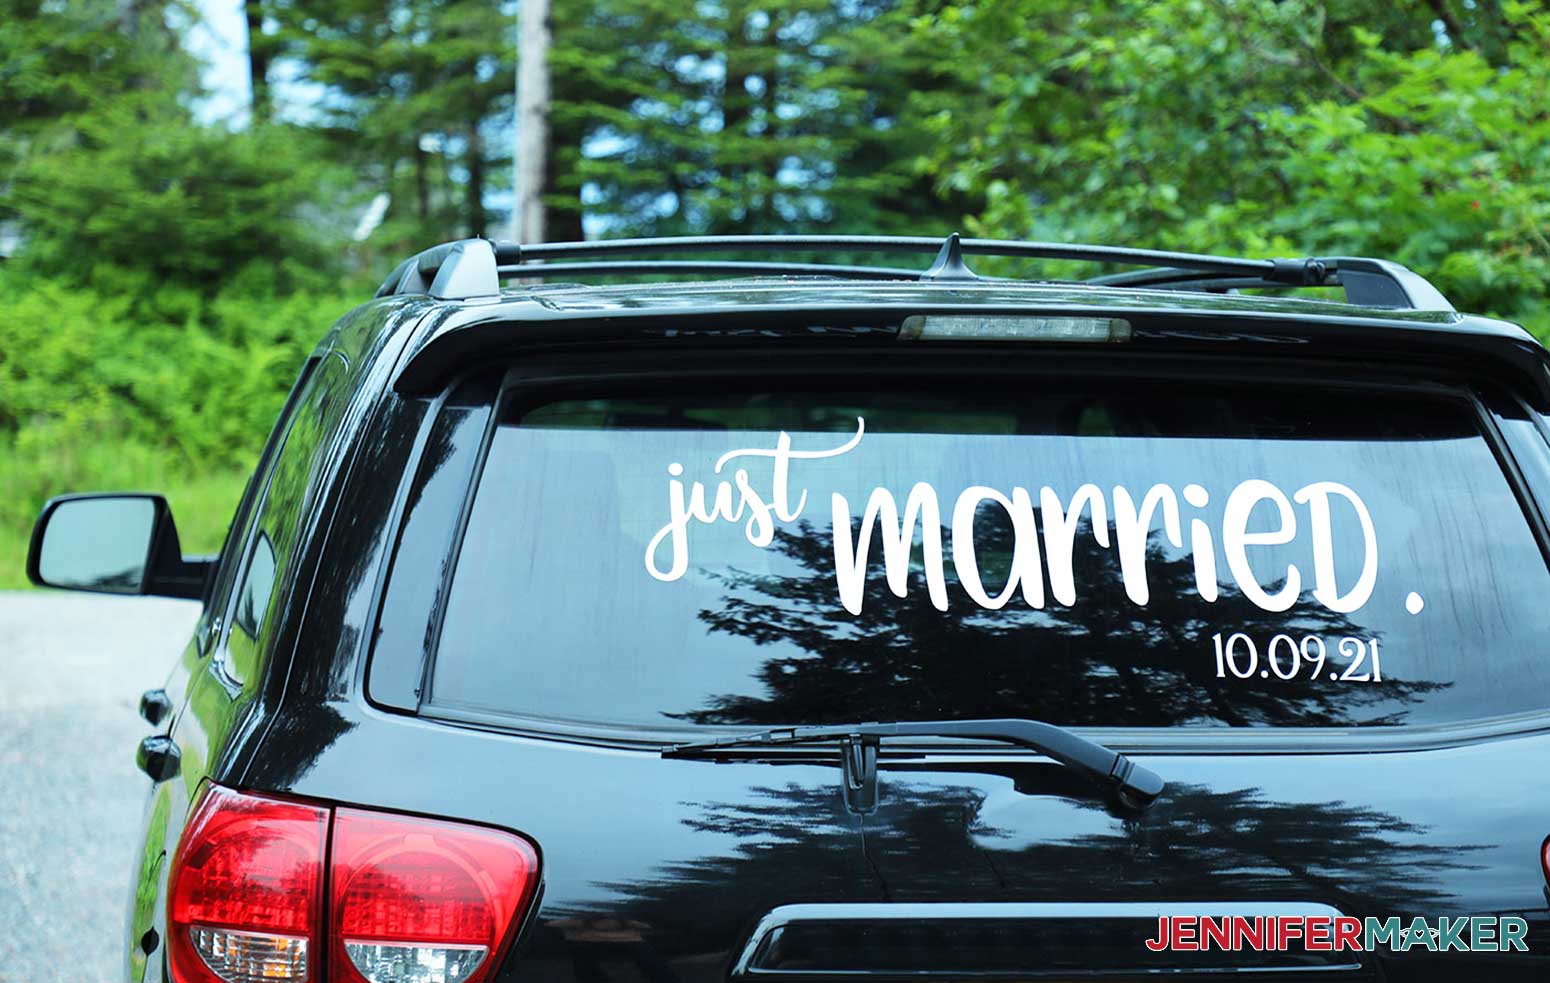 Just Married #1 customized decal on vehicle window